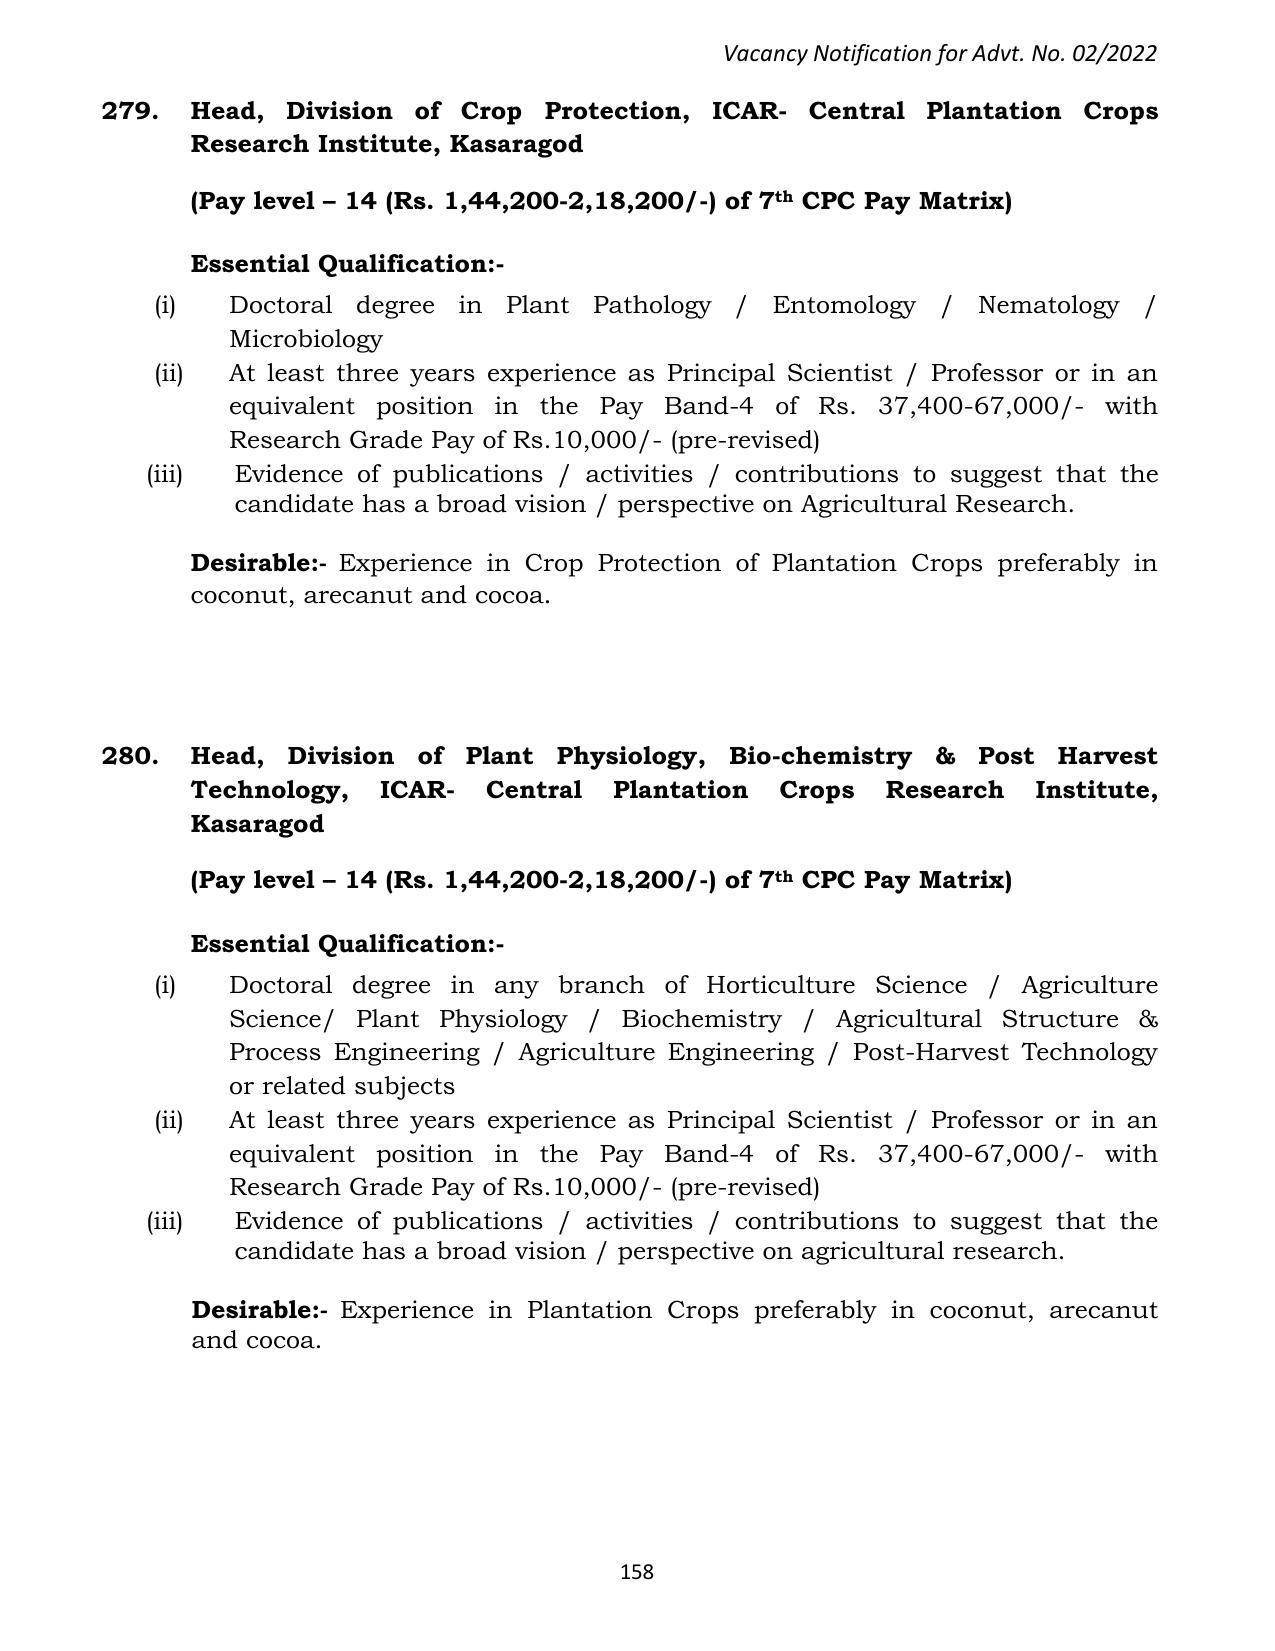 ASRB Non-Research Management Recruitment 2022 - Page 20